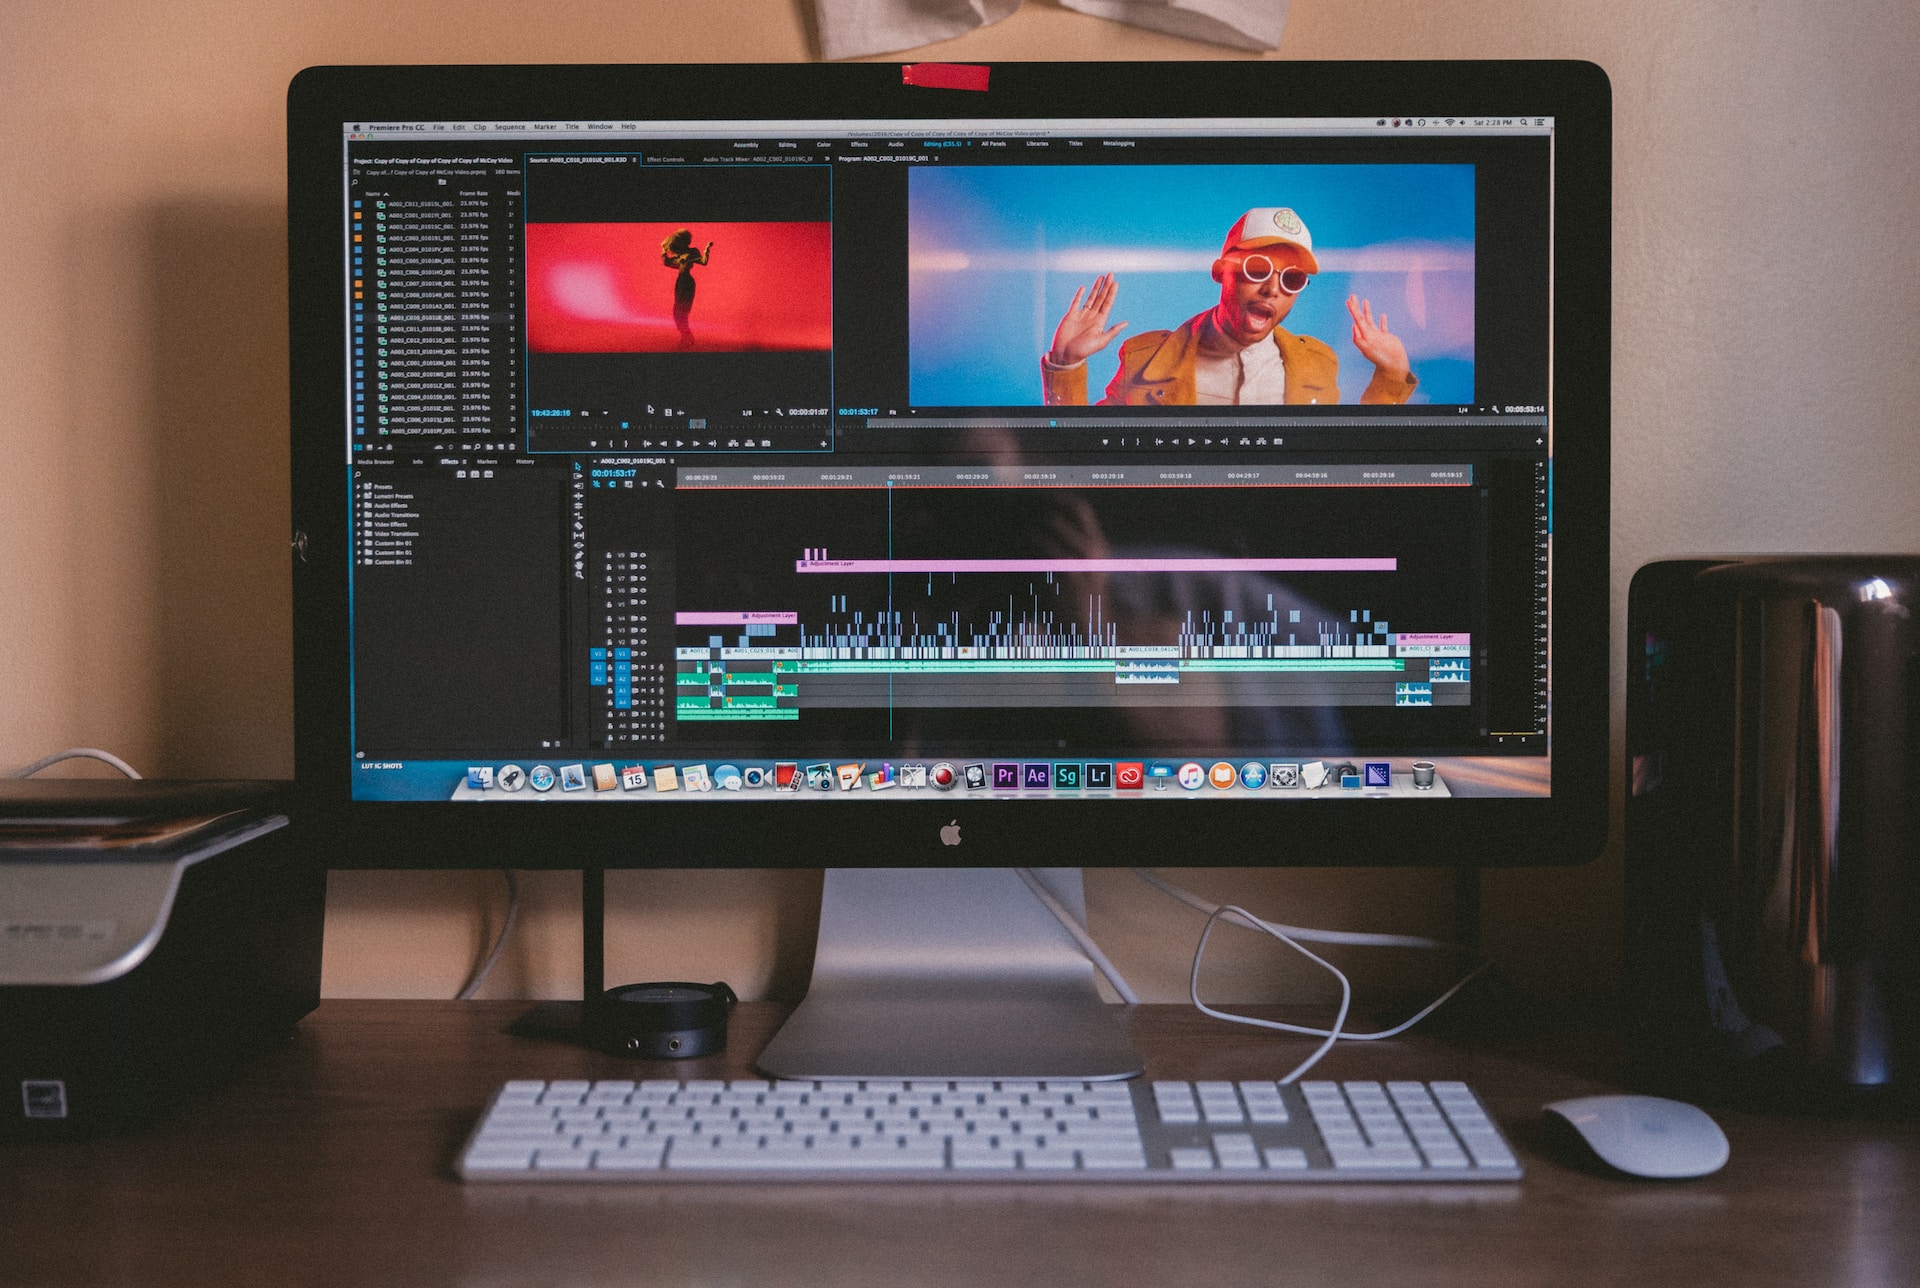 Creative corporate video being edited on a Mac